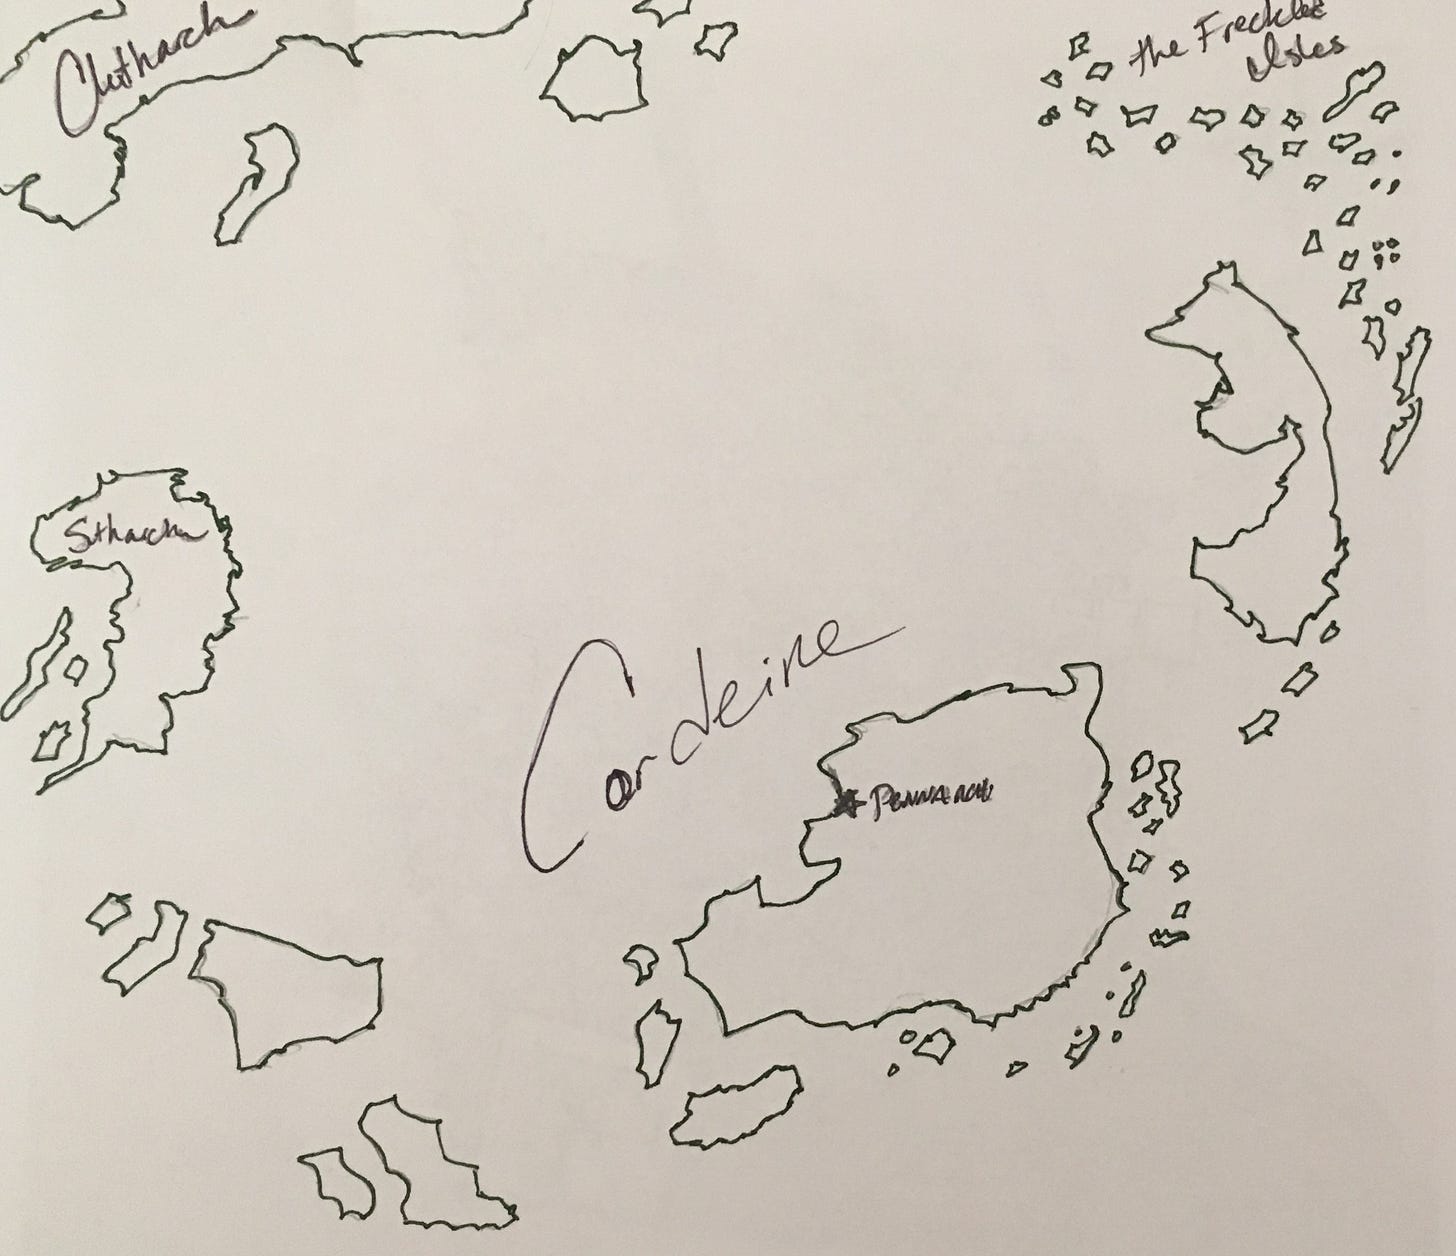 Hand-drawn map of a set of islands in a fantasy world